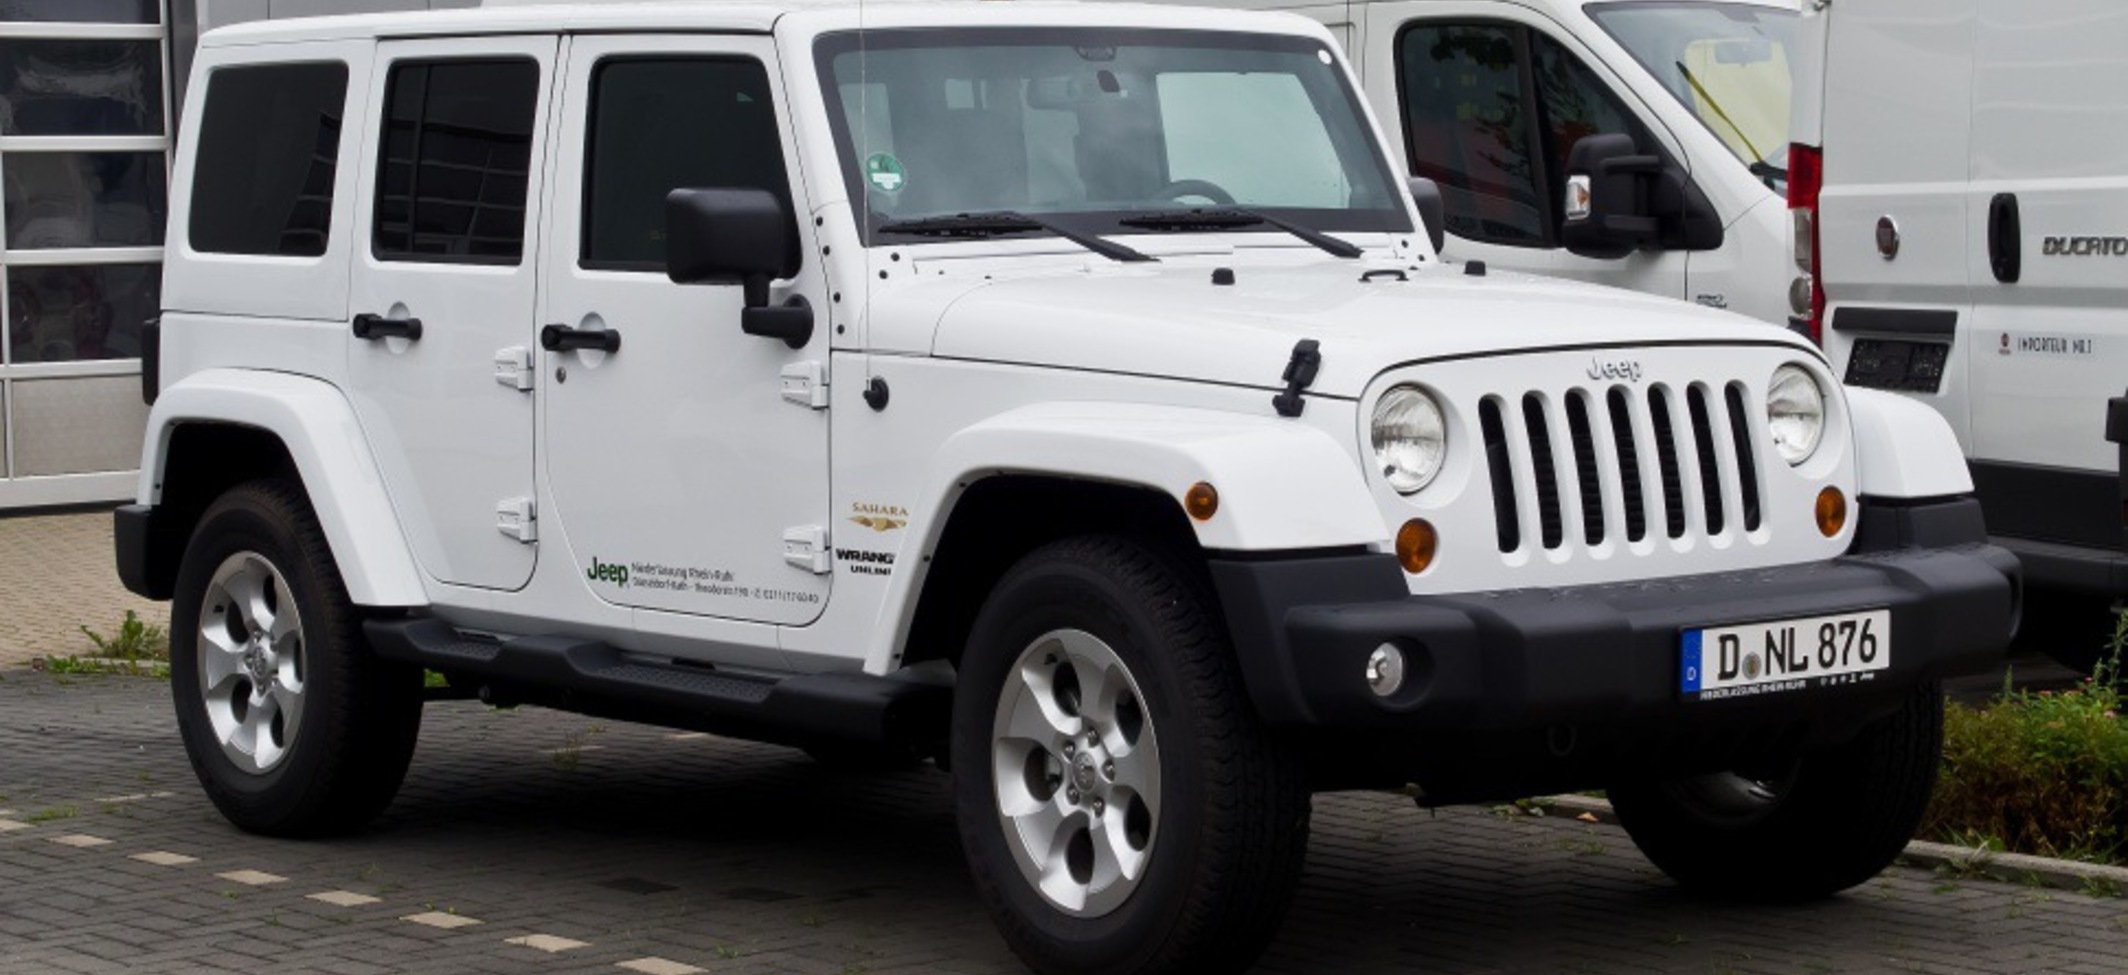 Jeep Wrangler III Unlimited (JK)  V6 12V Sport (280 Hp) 4x4 Automatic  2011, 2012, 2013, 2014, 2015, 2016 specifications, prices & reviews | XEZii